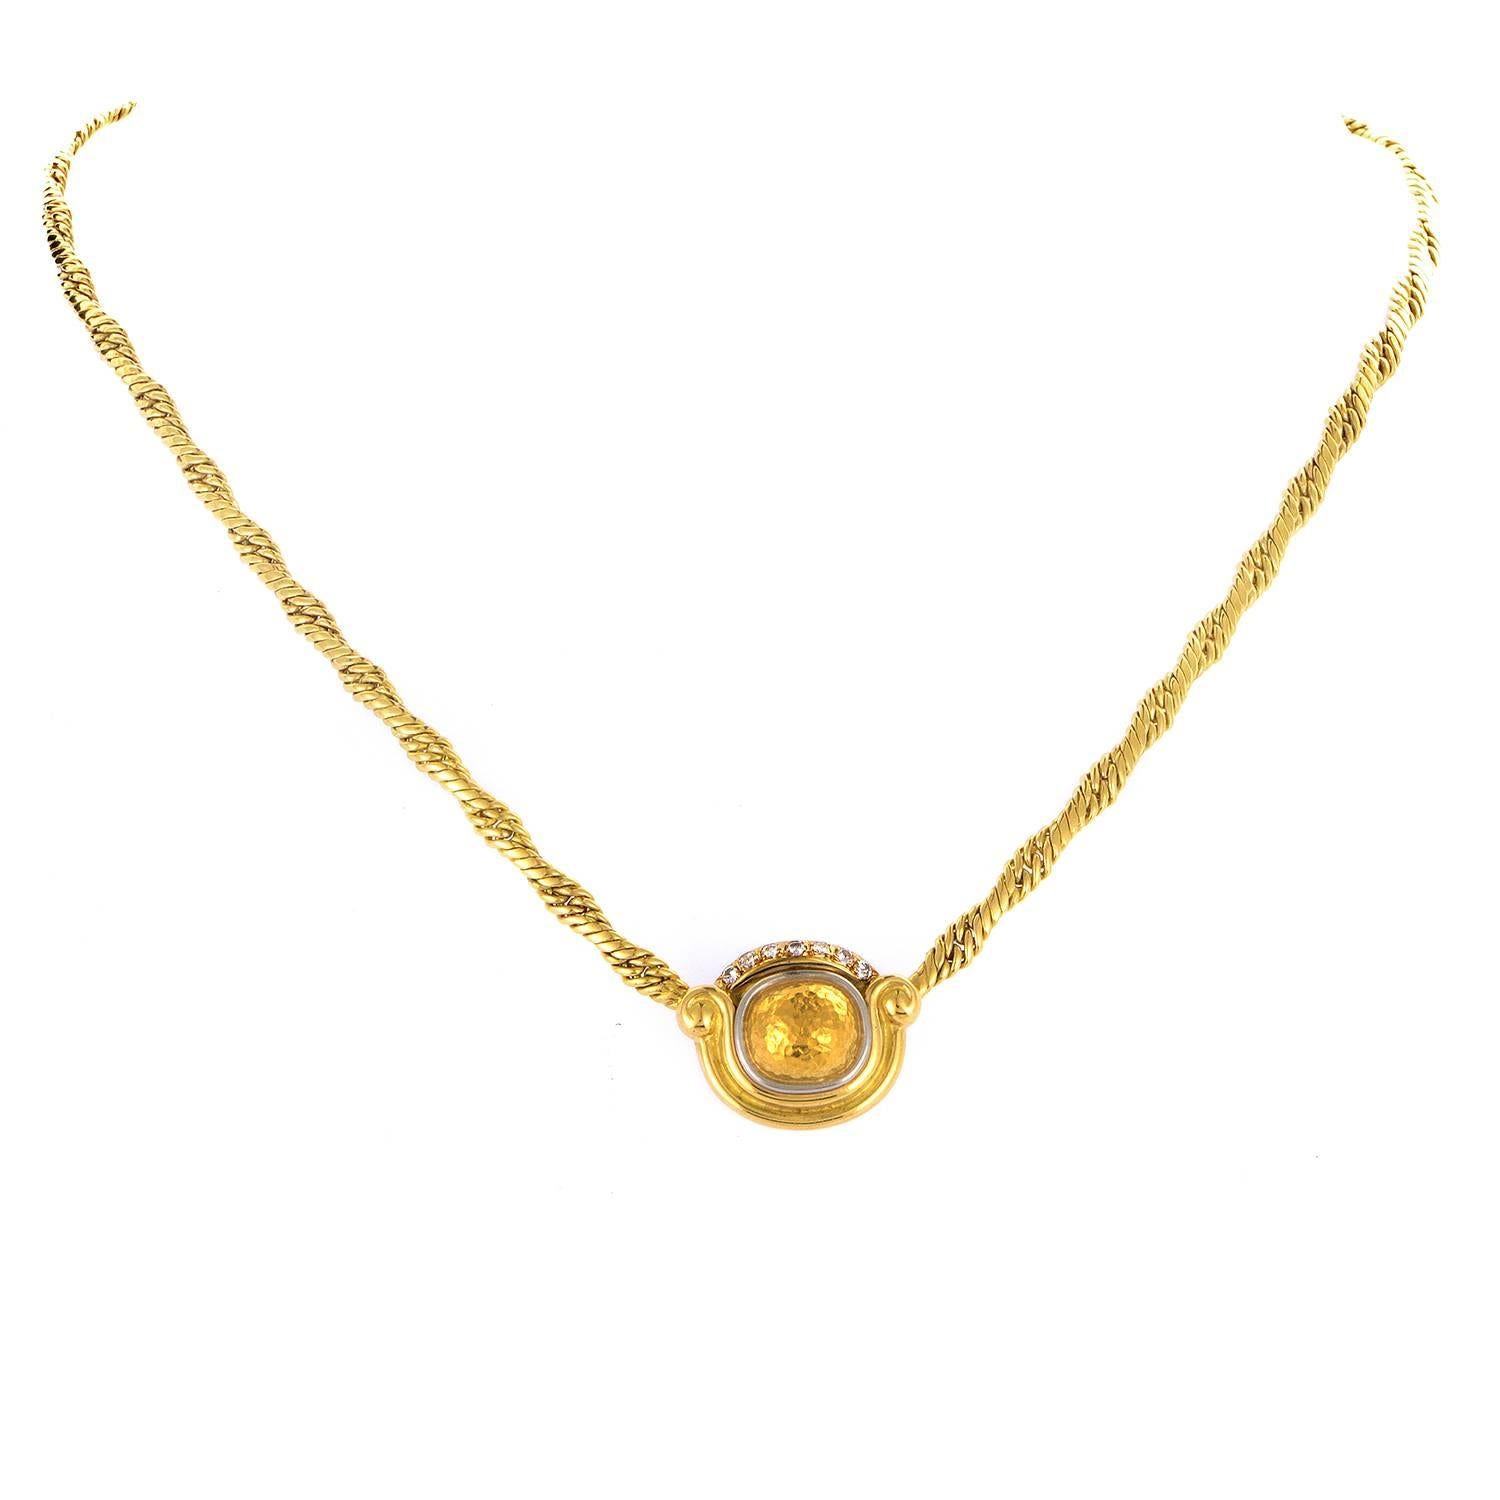 Employing diverse finishes and textures of 18K yellow gold to create a magnificent sight that will captivate your attention, this exceptional necklace from Chaumet also boasts the splendidly bright tone of 18K white gold and 0.20ct of glistening